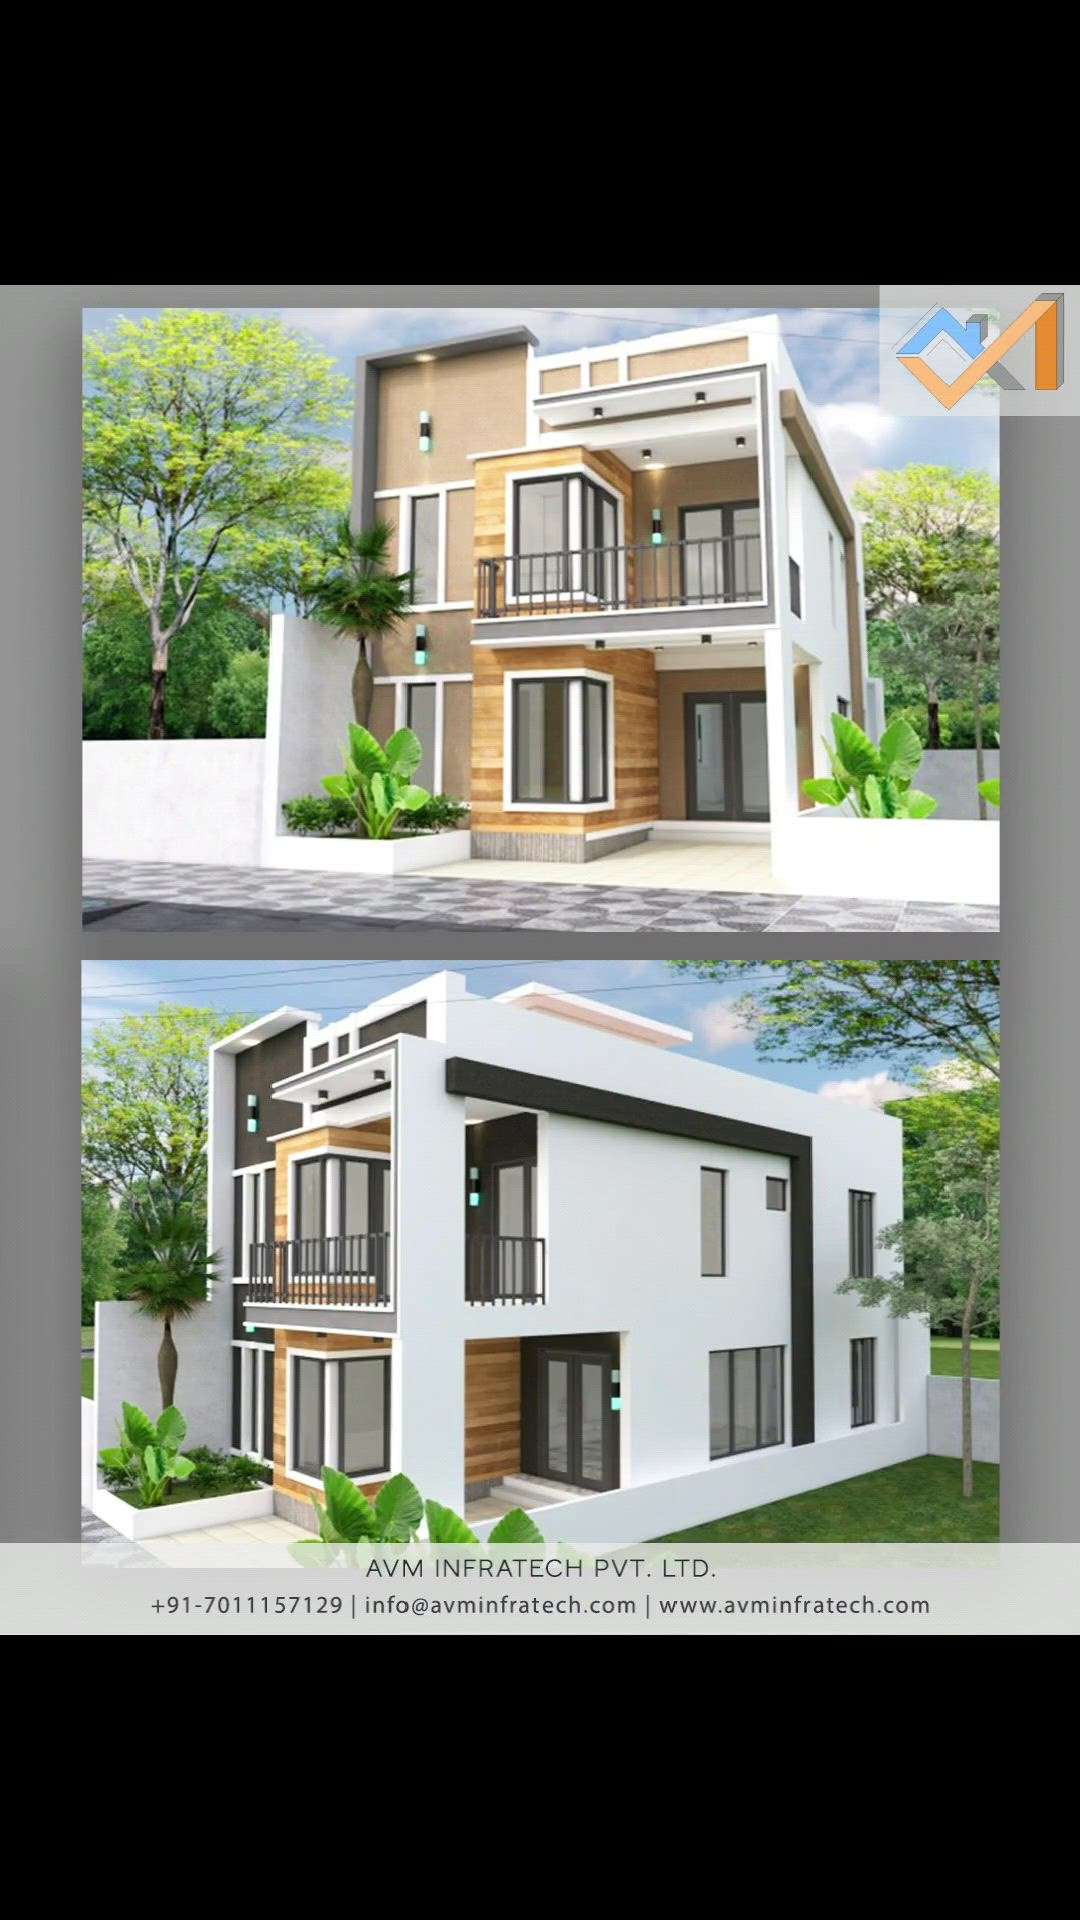 Most bedrooms in a two-storey house are located upstairs, while the ground floor is used exclusively for living quarters. Two-storey layouts provide more architectural freedom, allowing for taller ceilings and more noticeable separation of living and entertaining areas.


Follow us for more such amazing updates.
.
.
#2storey #2storeyhouse #2storeyhome #2floors #housedesign #housedesigns #homedesign #homedesignideas #homedecor #homedesigns #homeplans #homeplan #houseplan #houseplans #houseideas #homeideas #architect #architecture #interior #exterior #3d #3drender #3dvisualization #facade #facadedesign #avminfratech